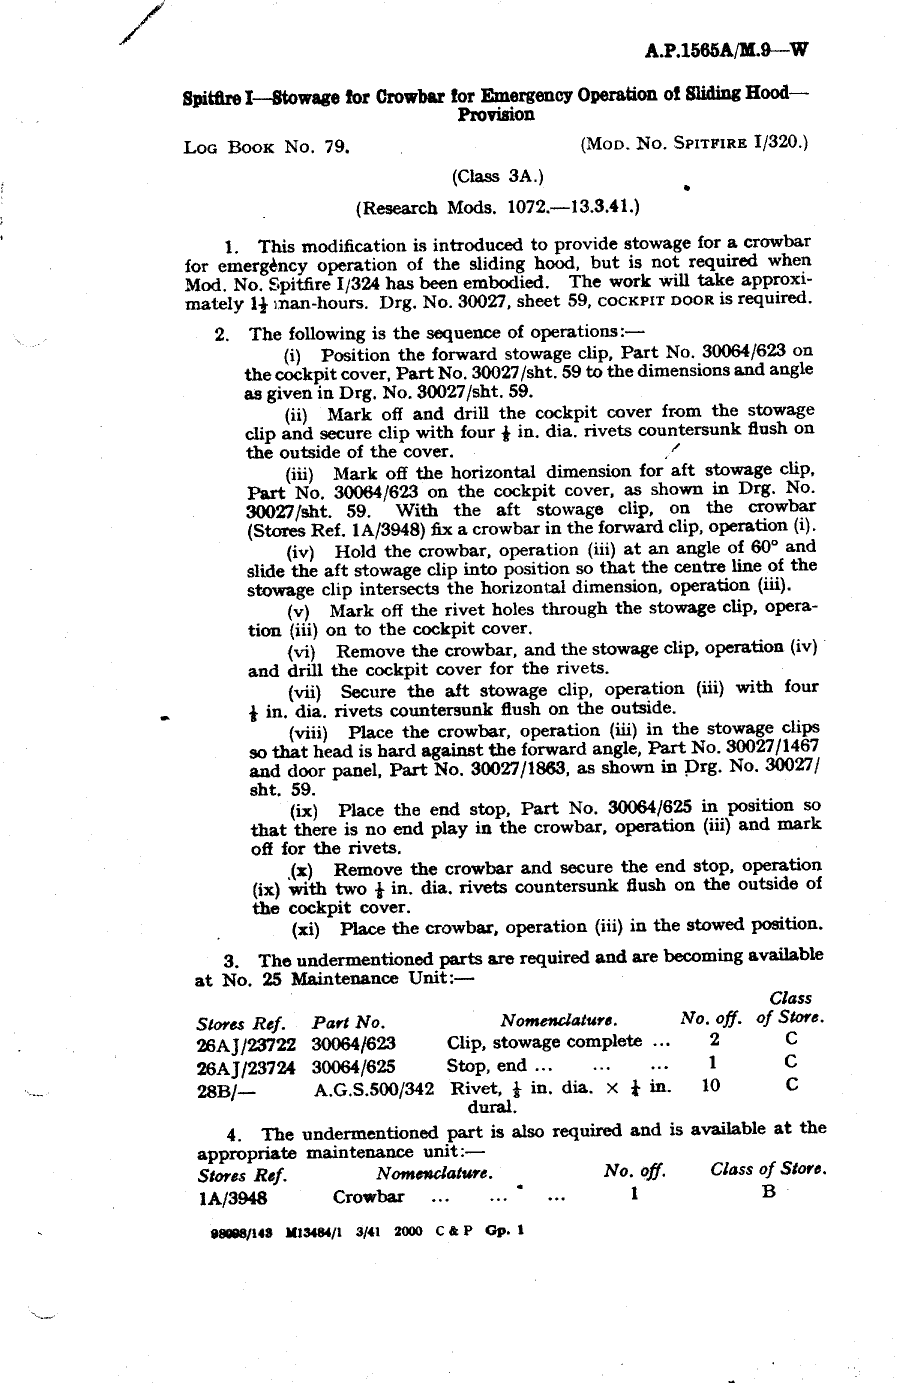 Sample page 1 from AirCorps Library document: Spitfire I Stowage for Crowbar for Emergency Operation of Sliding Hood Provision